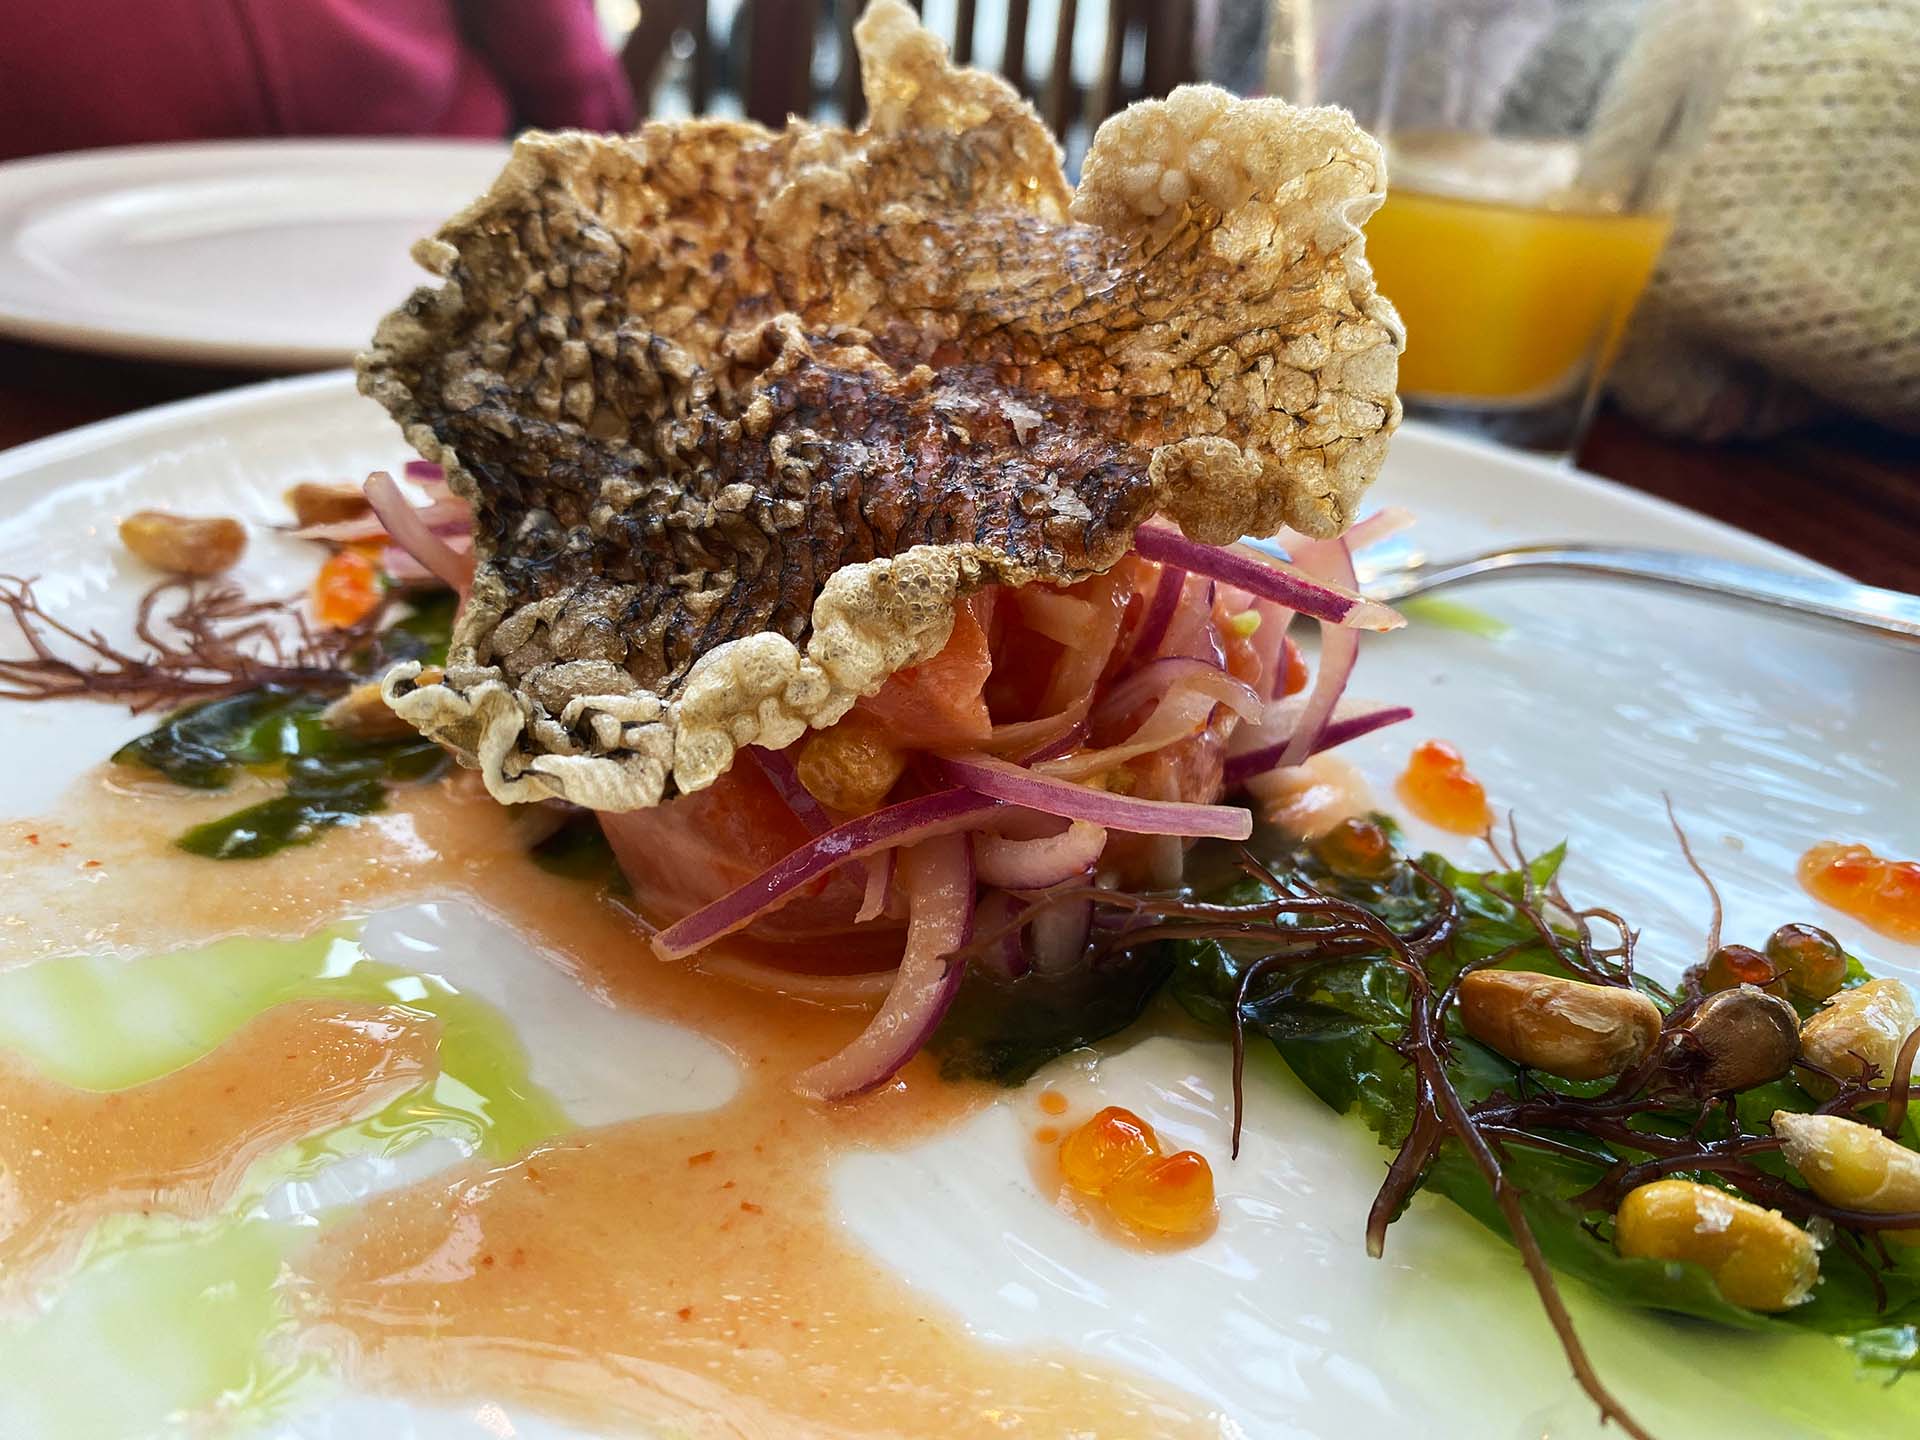 An elegantly plated Peruvian cebiche: raw fish topped with a crinkled piece of fried trout skin, with trout roe and assorted seaweeds arranged on the plate.